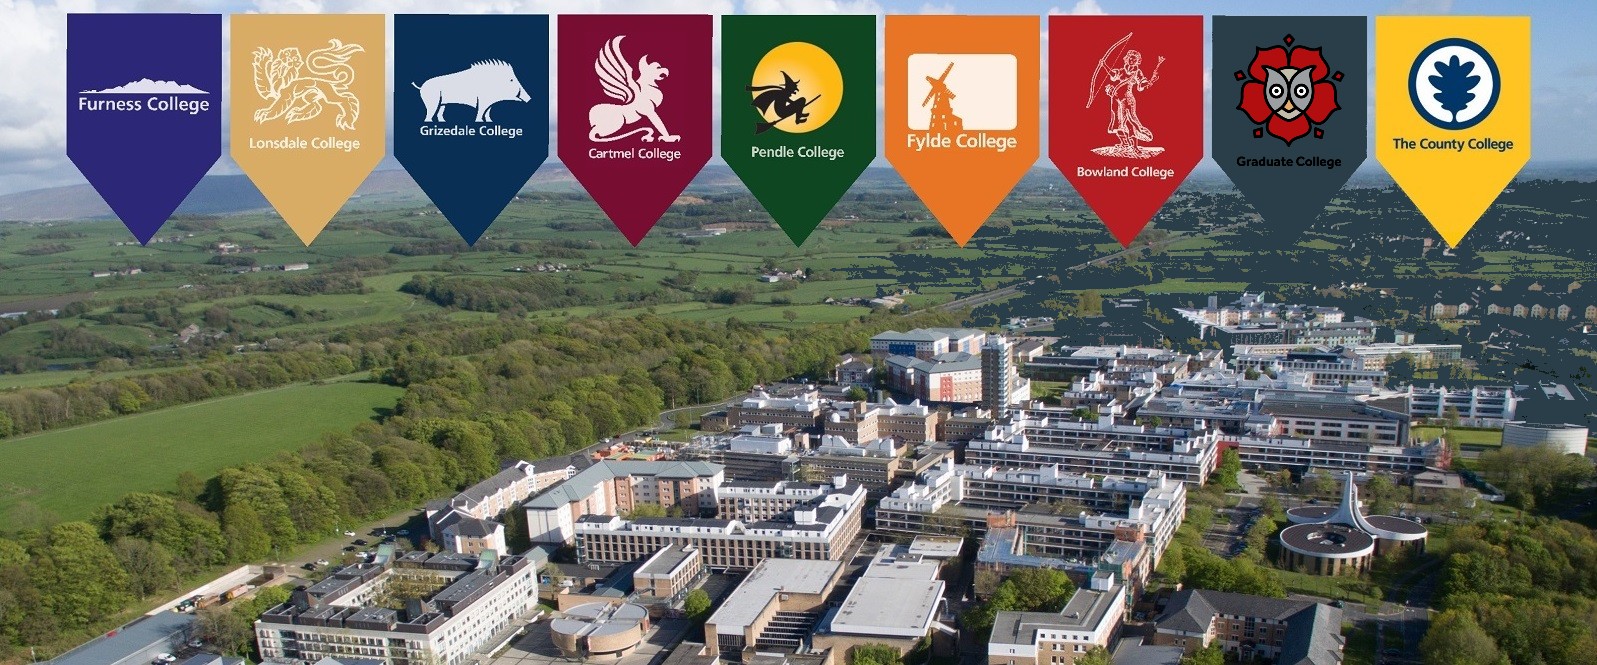 Shields of the colleges emplaced over a campus aerial photo.